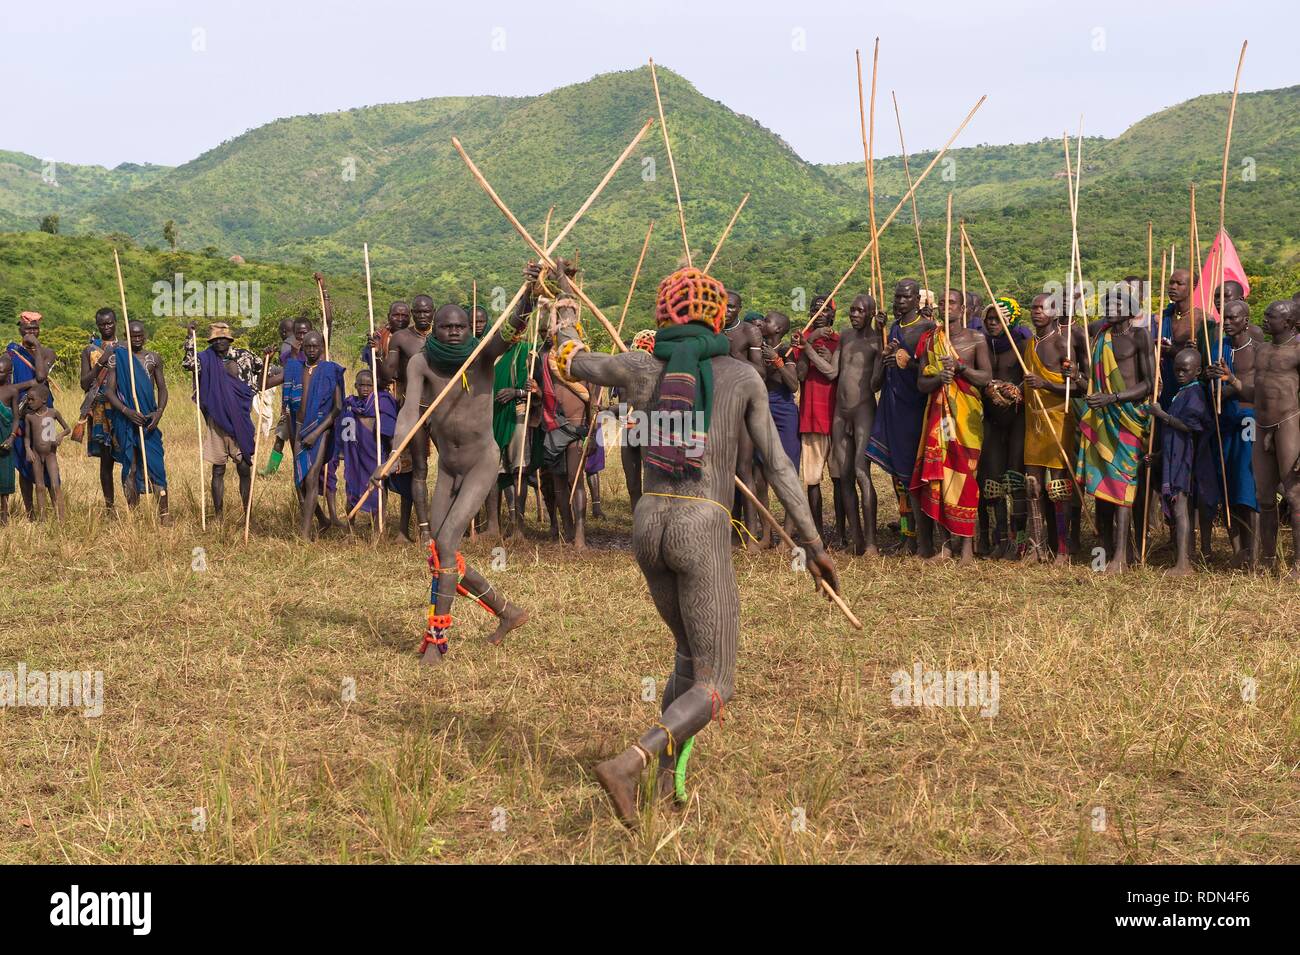 Donga stick fighters, Surma tribe, Tulgit, Omo River Valley, Ethiopia, Africa Stock Photo